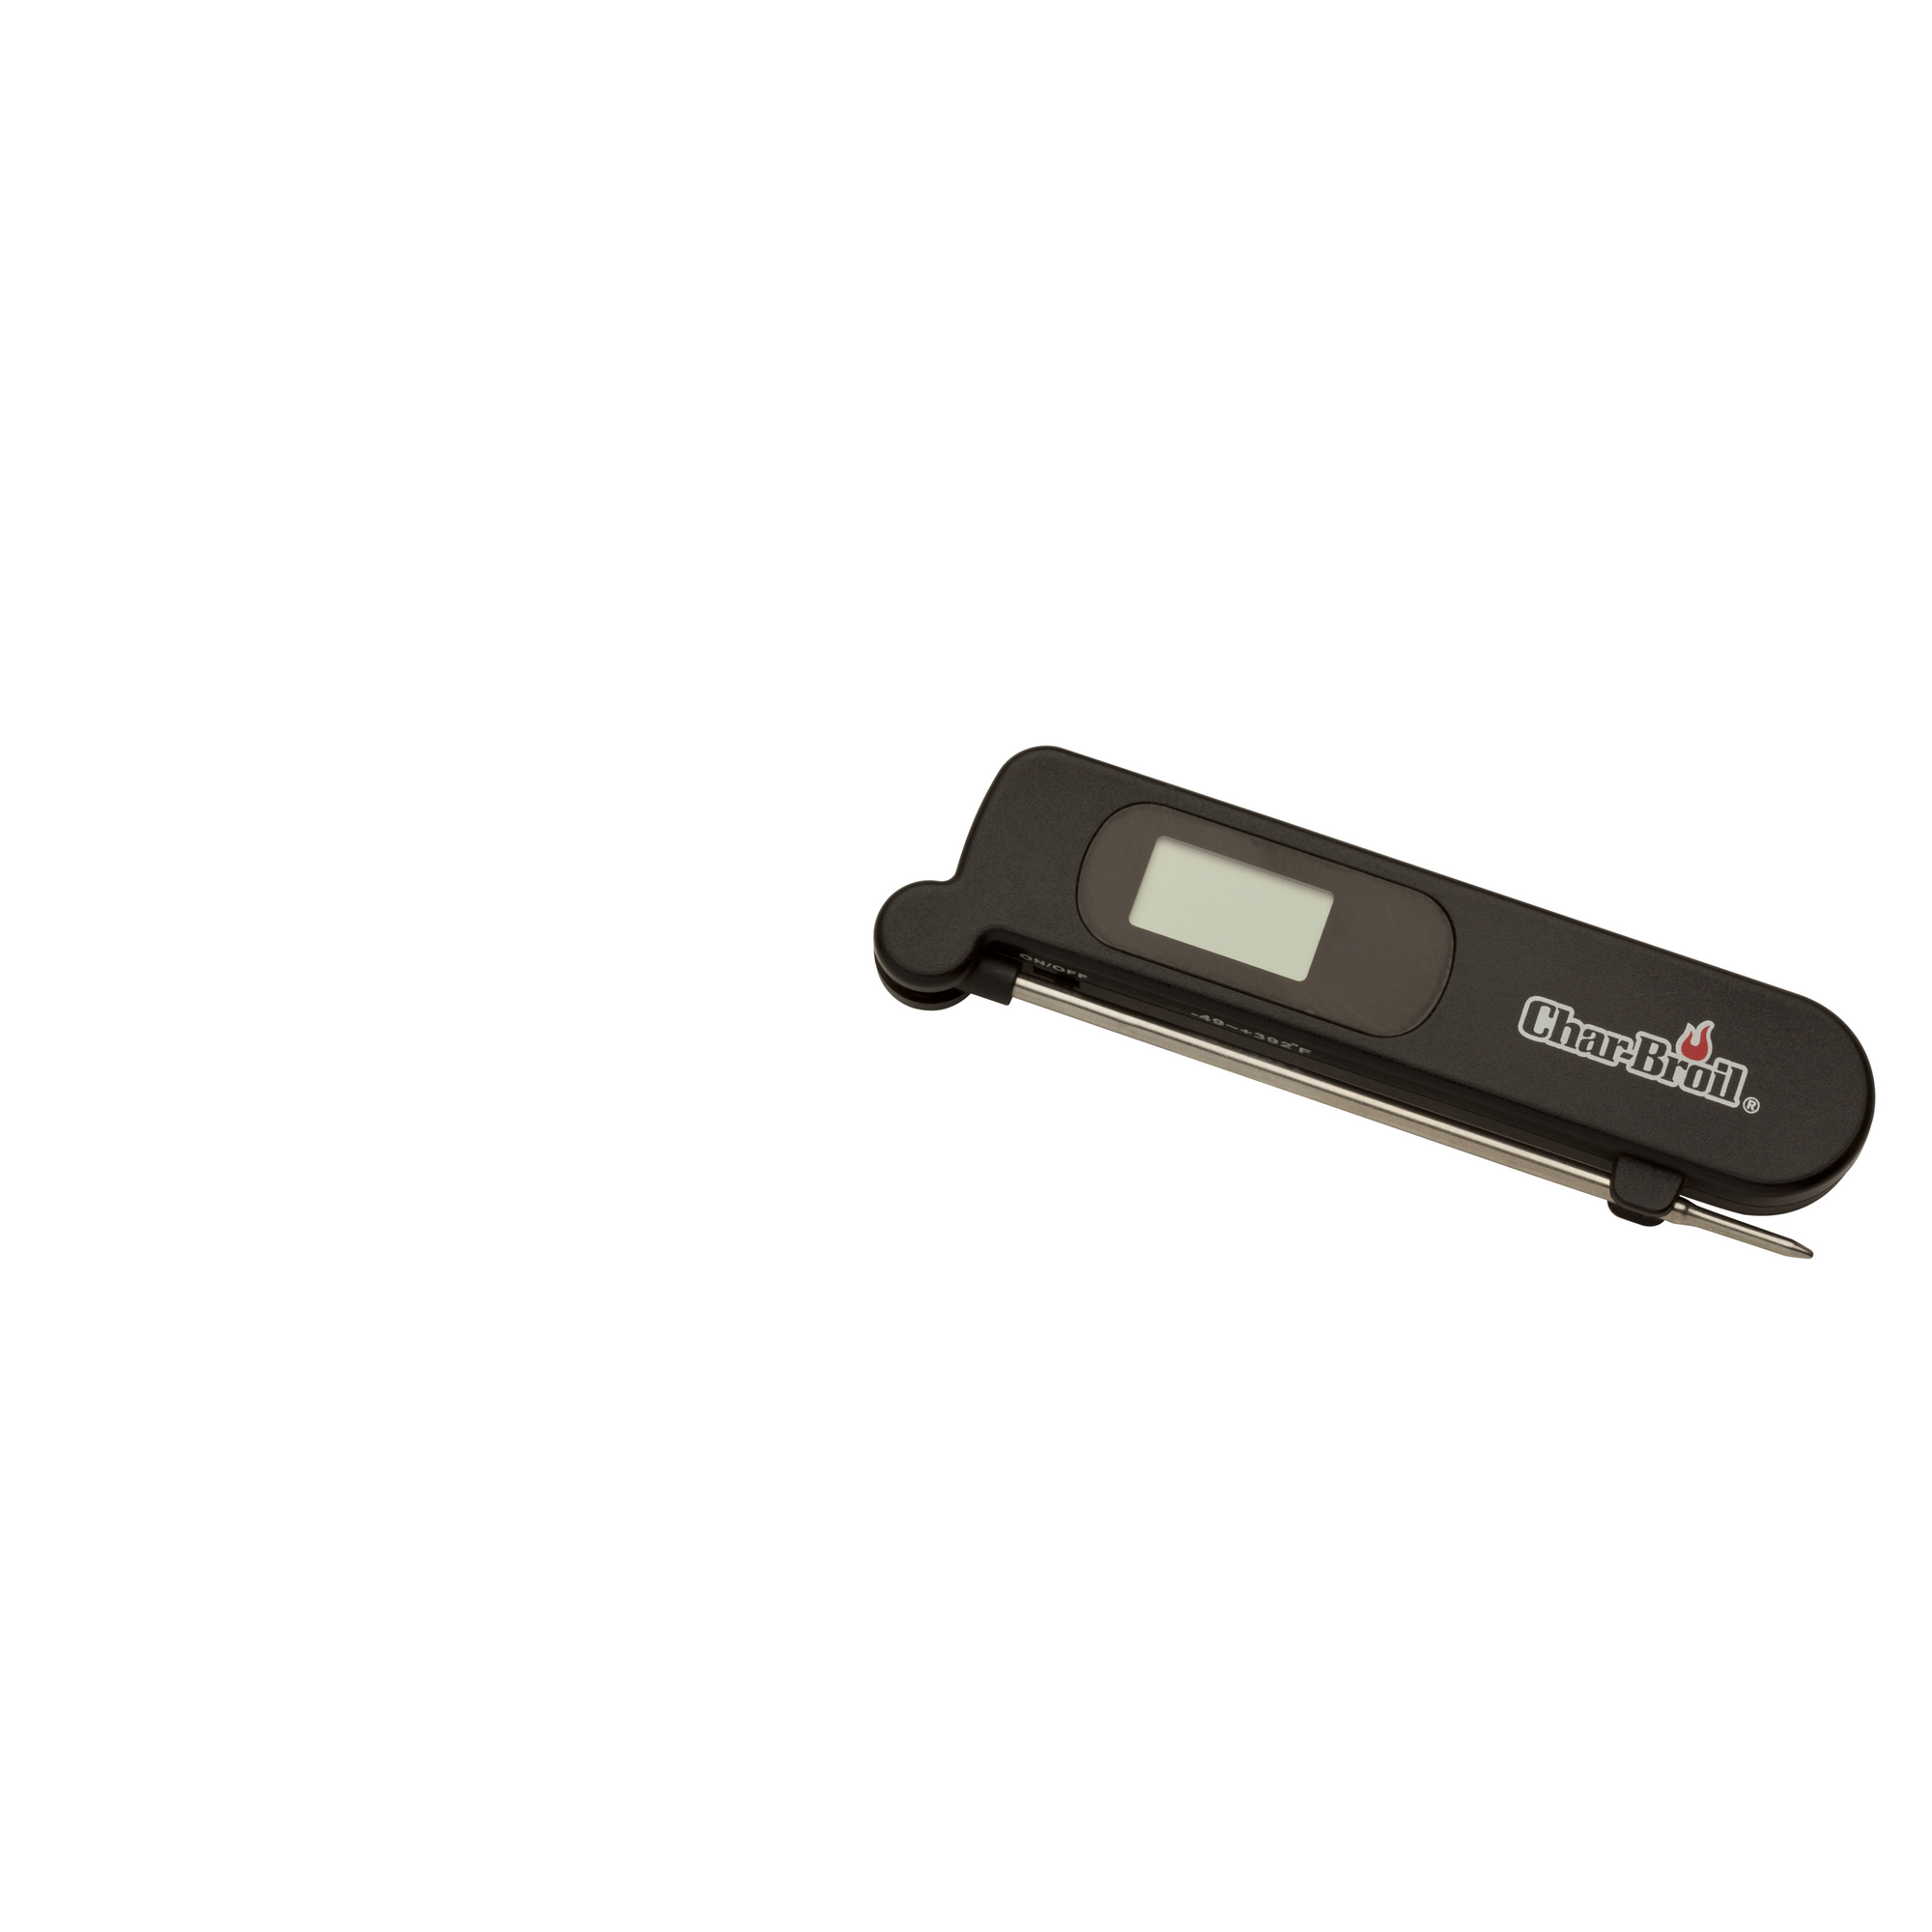 Digitalthermometer schwarz, mit LCD-Display + product picture